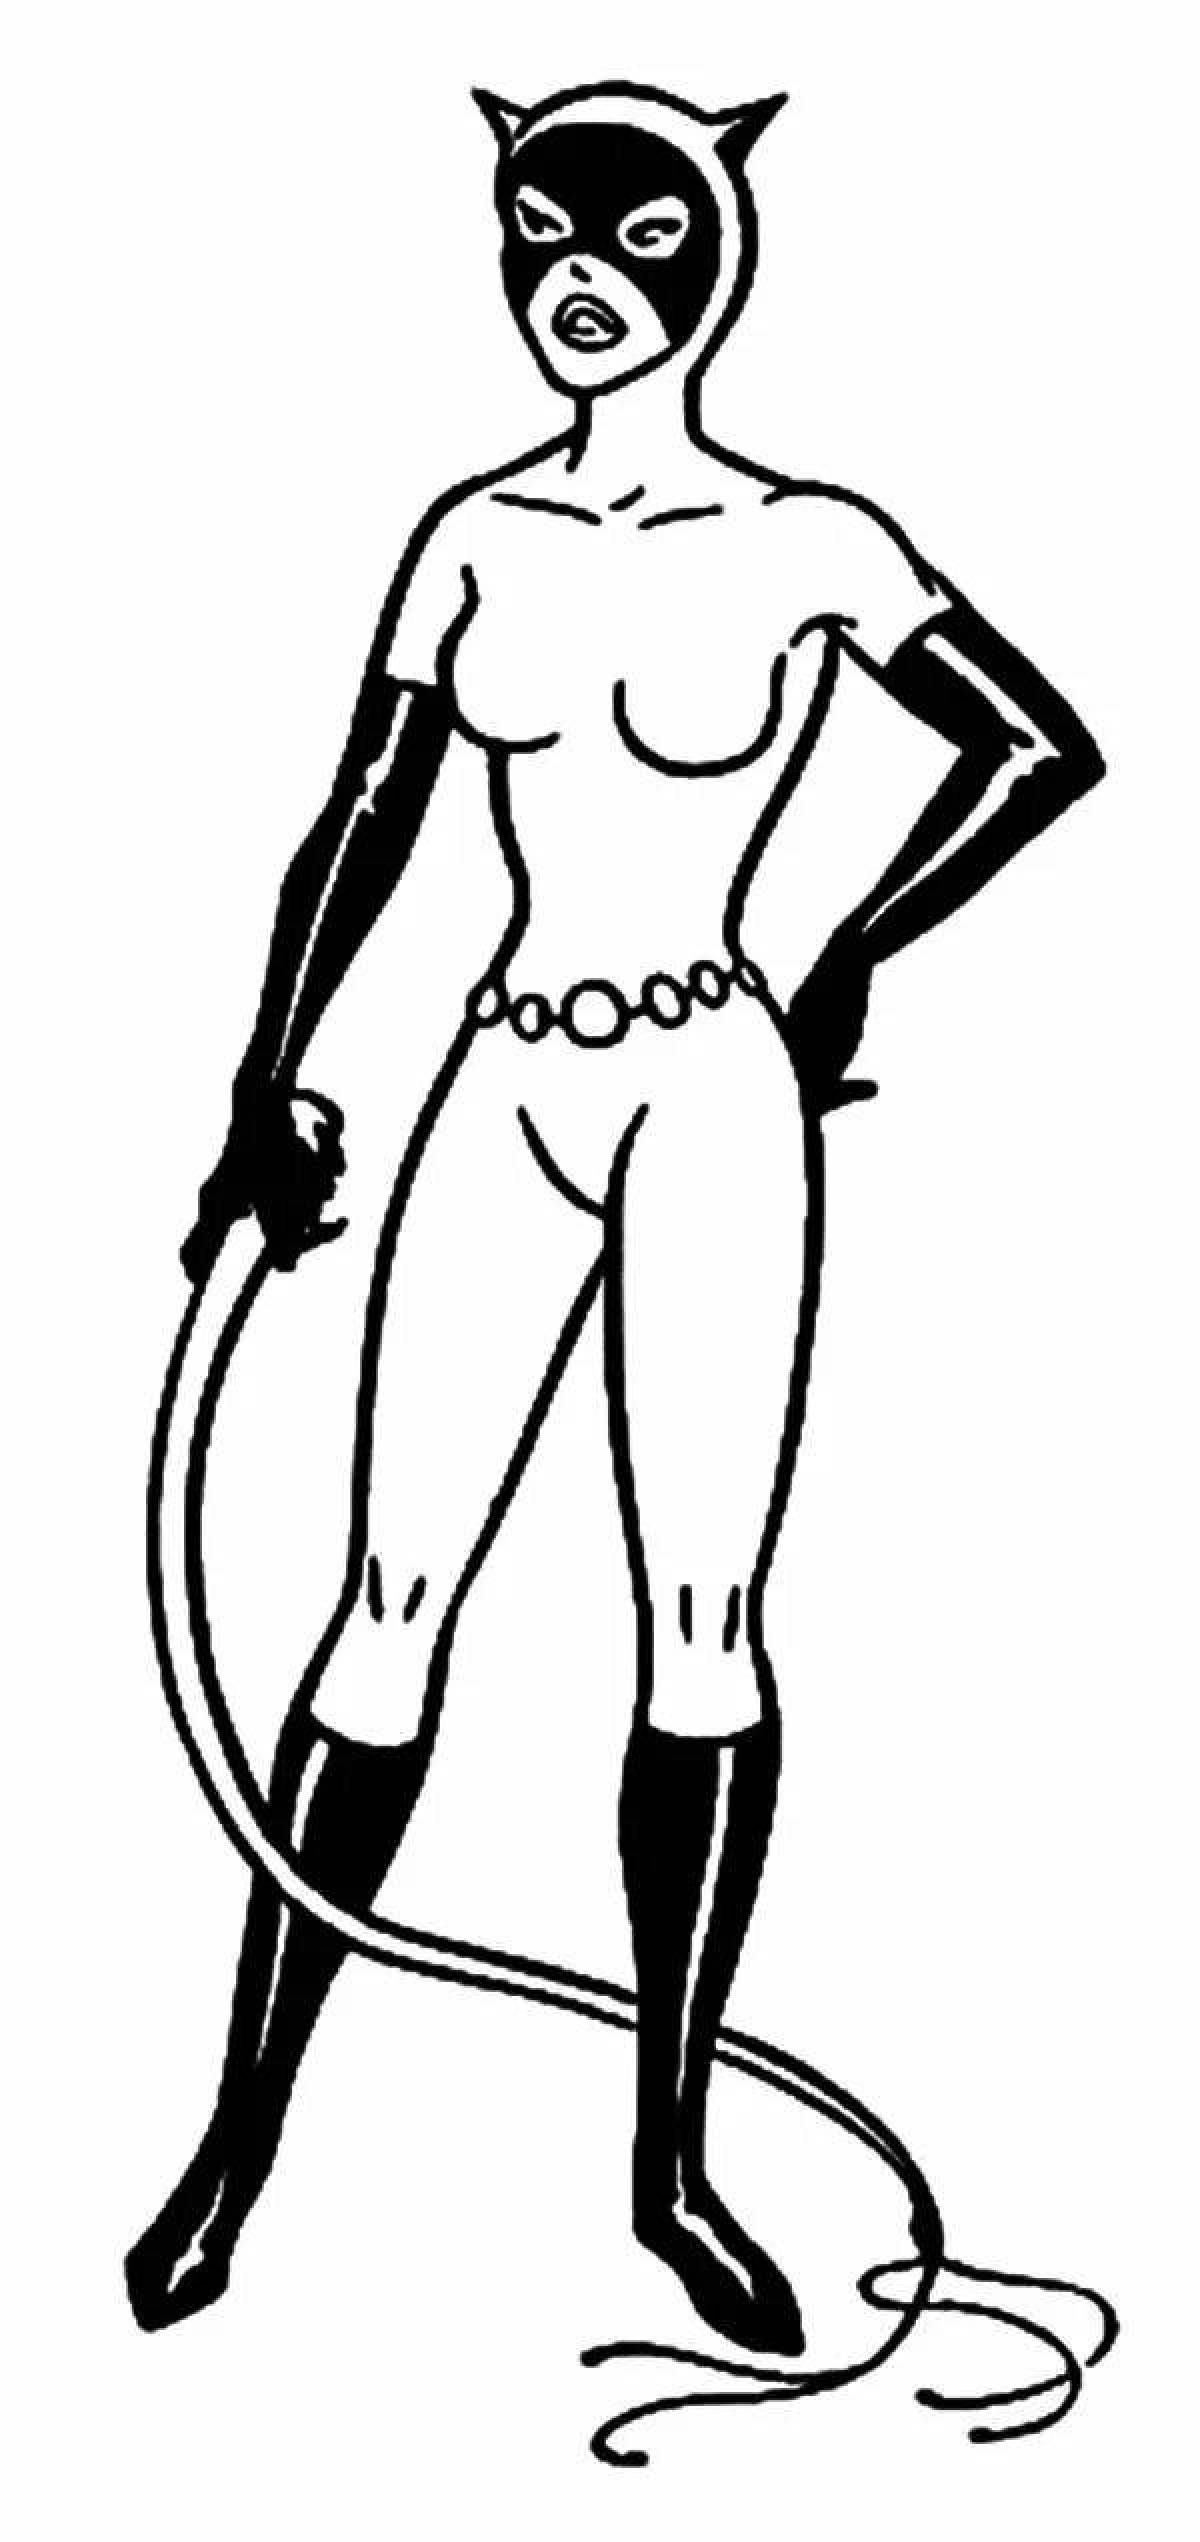 Coloring page adorable catwoman